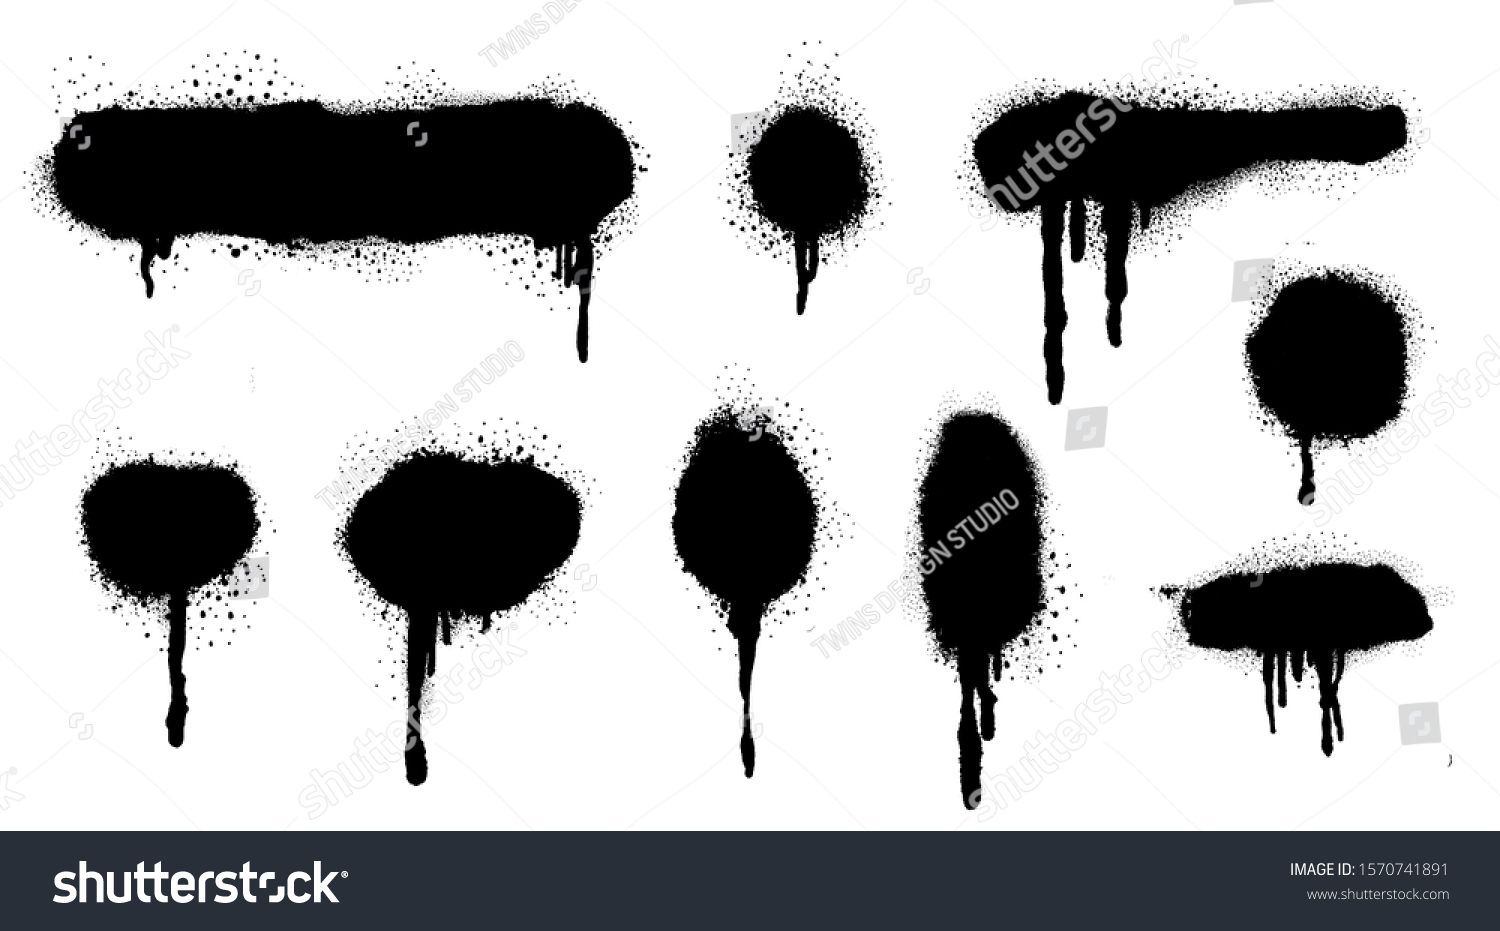 Spray Paint Vector Elements isolated on White Background, Lines and Drips Black ink splatters, Ink blots set, Street style. #1570741891